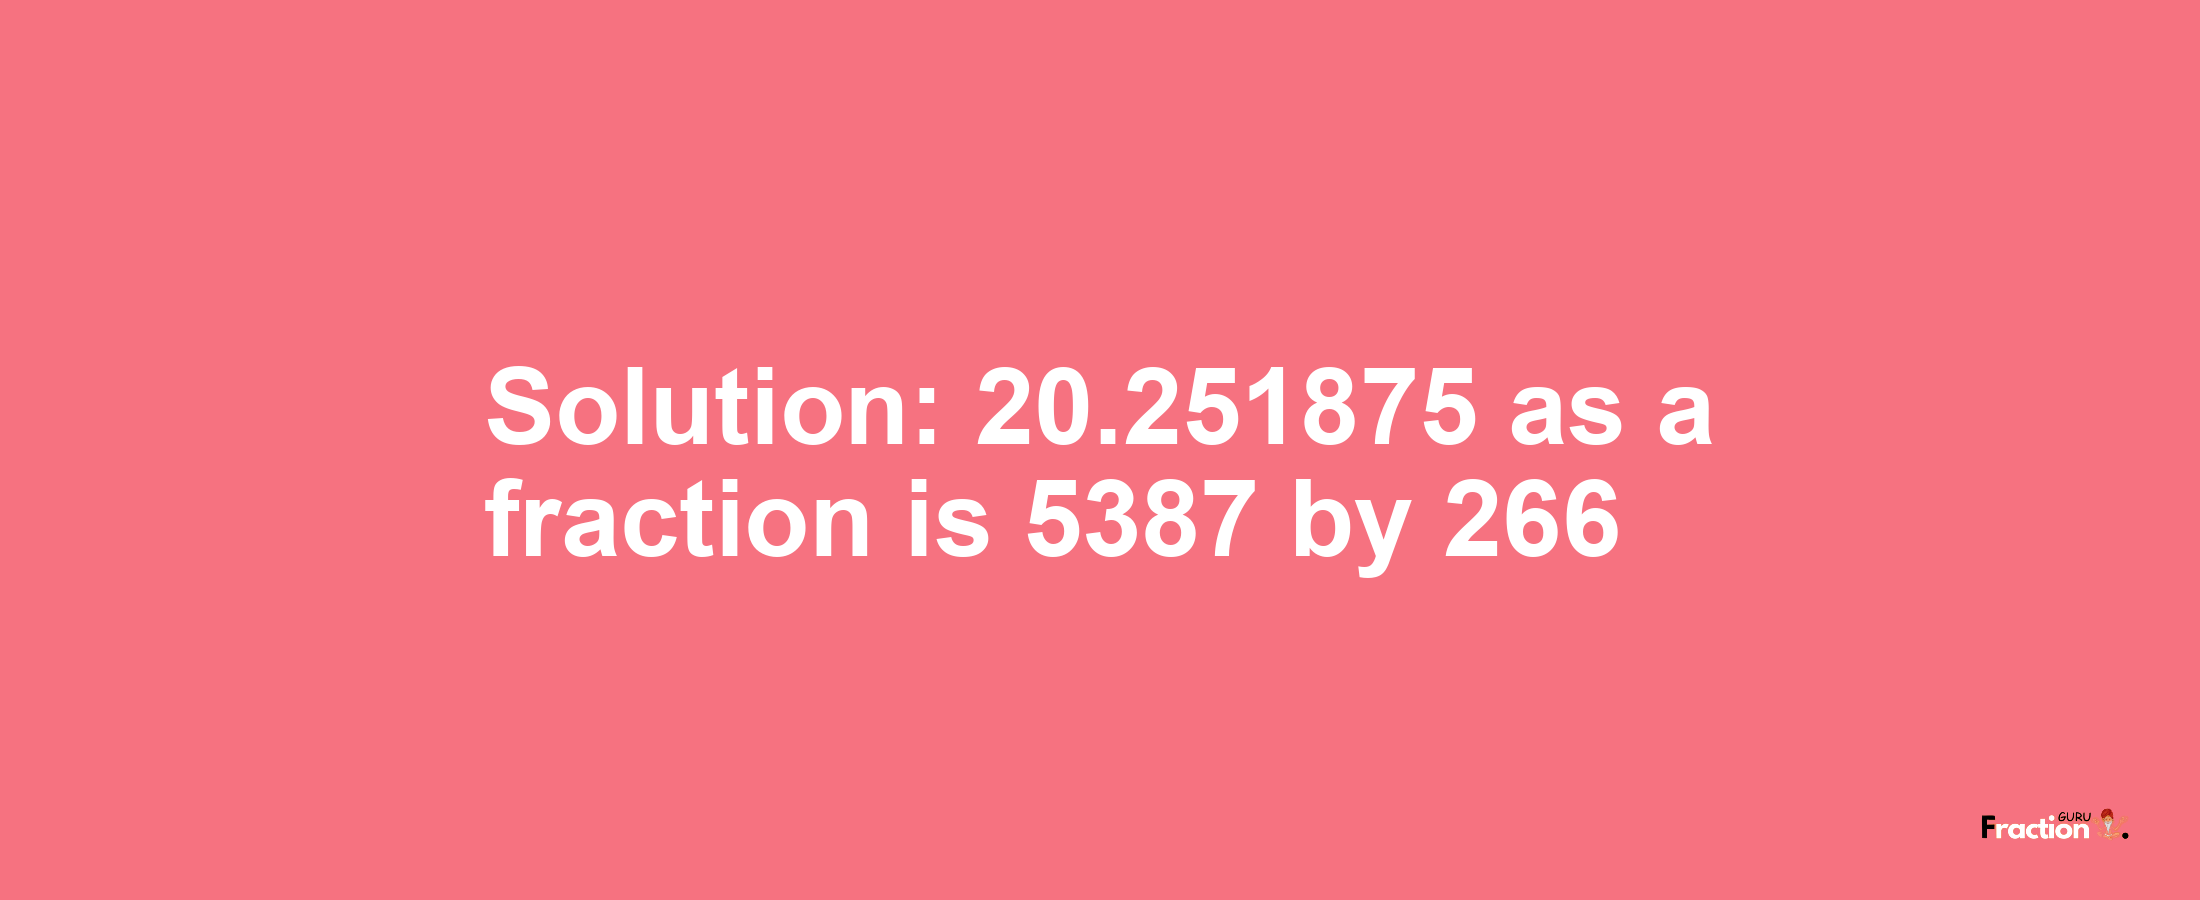 Solution:20.251875 as a fraction is 5387/266